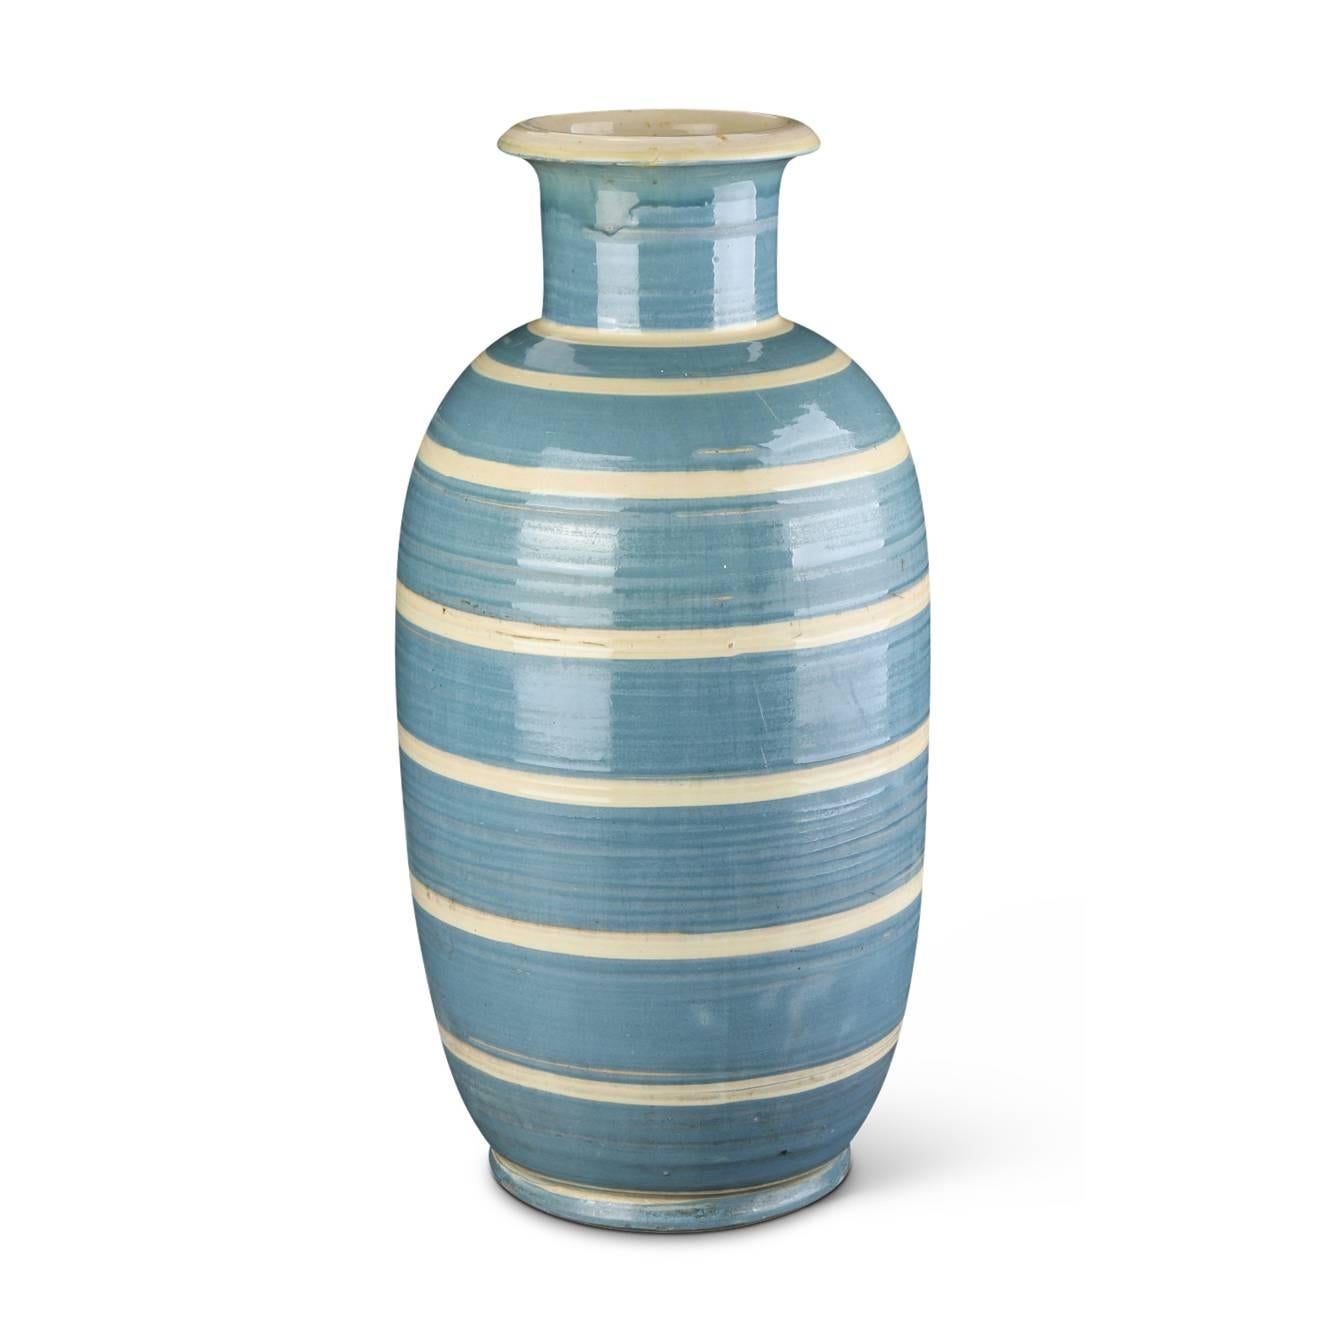 Monumental vase with elongated oval form and neck with flared mouth in hand-turned earthenware, handsomely glazed in grey-blue with ivory stripes, Denmark, 1930s. Painted “HAK” mark.

